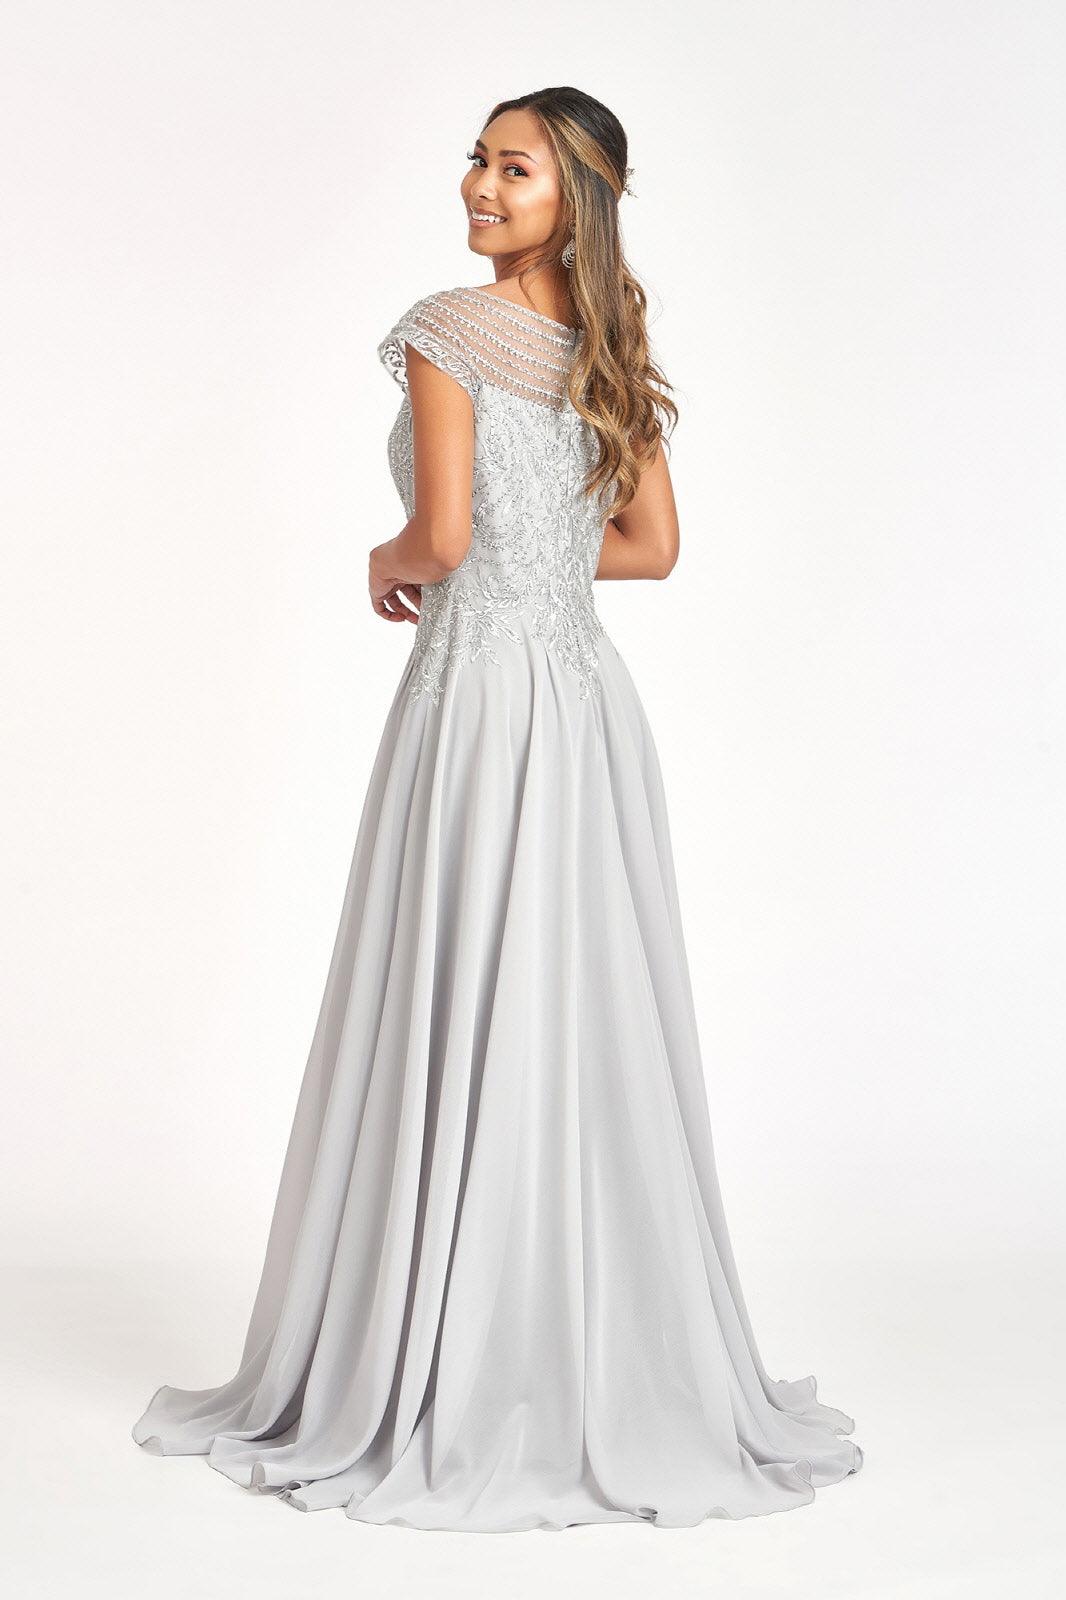 Long Formal Chiffon Mother of the Bride Dress Silver